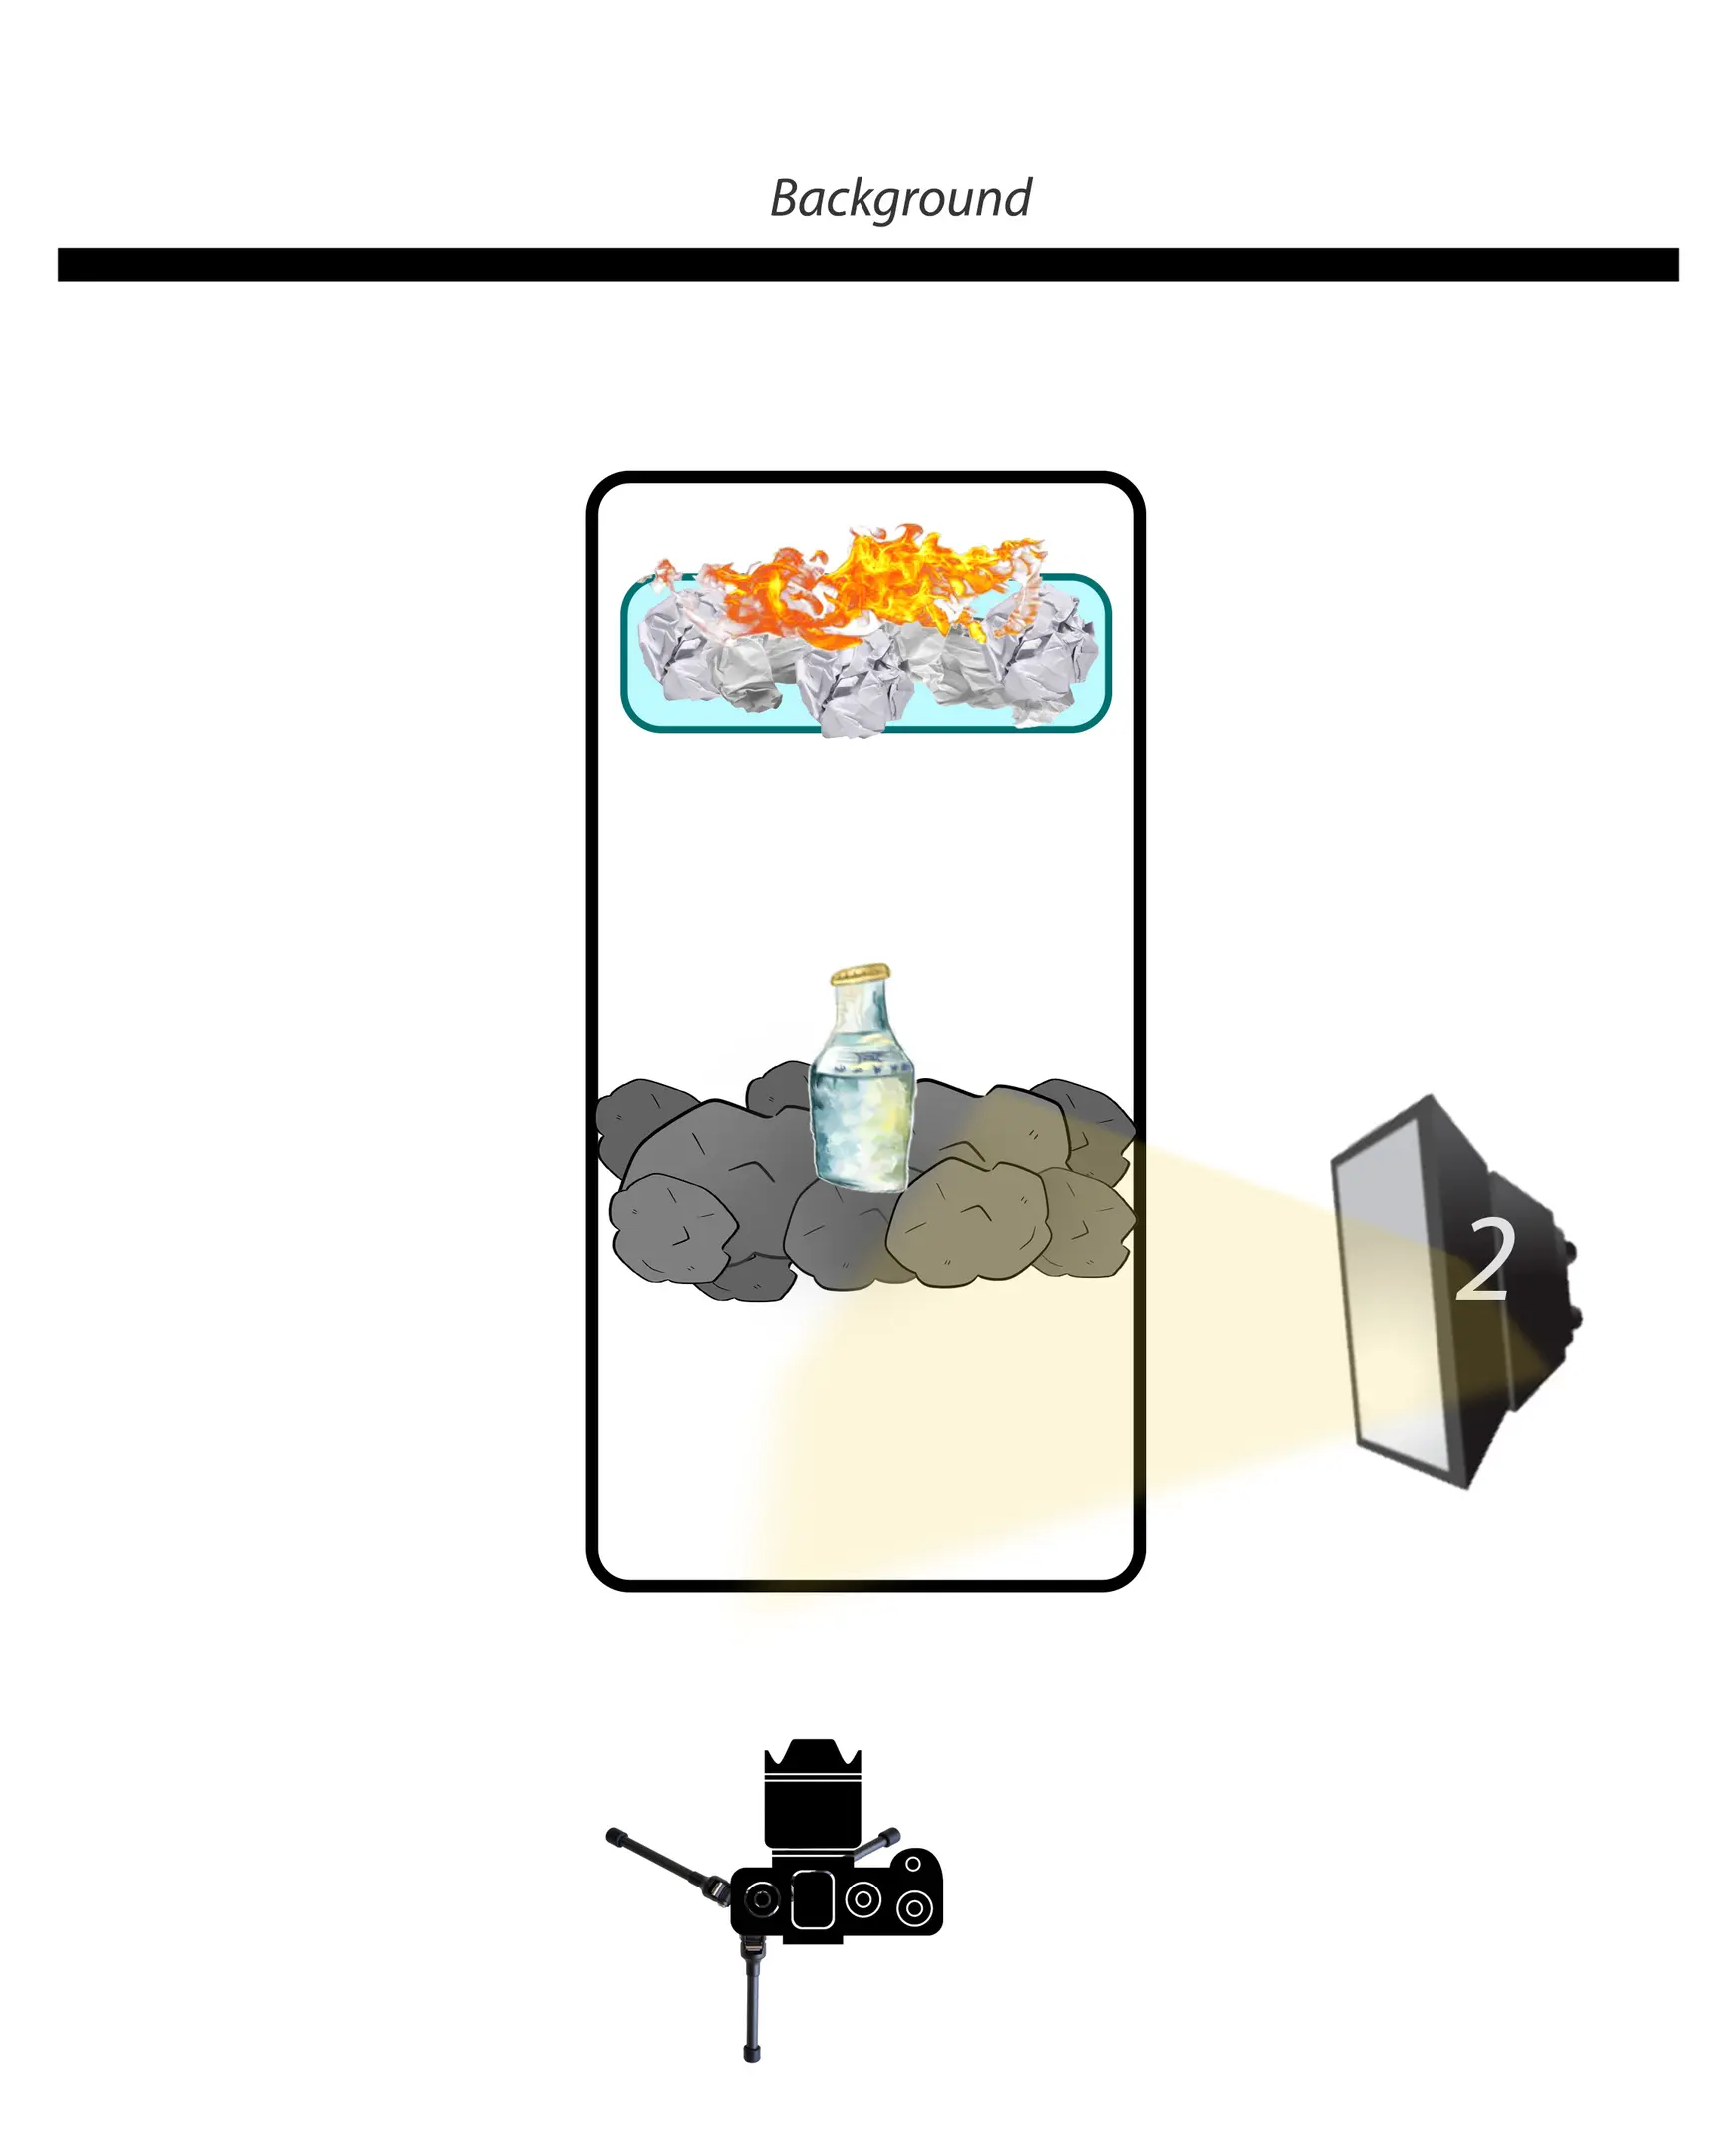 Light Schema 3. This schema shows a bottle standing in the coals, in the background in a glass heat-resistant dish - which is depicted by a blue rectangle with rounded edges - there is a paper that burns. The schema shows the second flash position and the direction in it glows. As well as the position of the background and the camera.